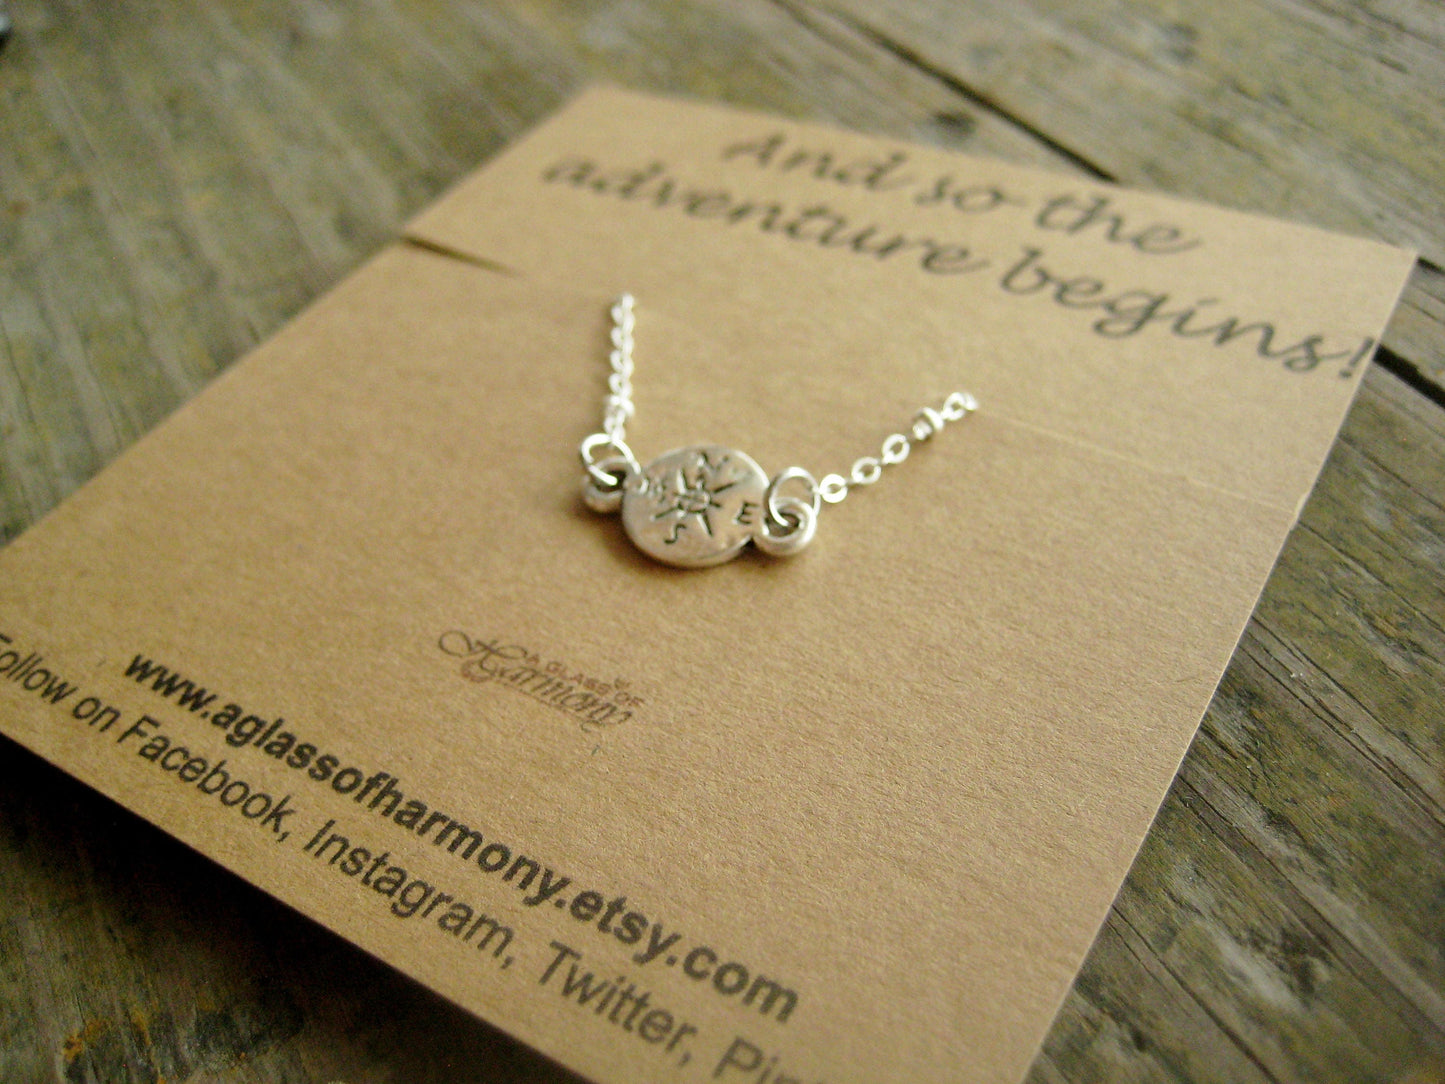 GRADUATION GIFT - Graduation Necklace, Graduation Jewelry, And So The Adventure Begins, Graduation gift for her, Mountain Jewelry